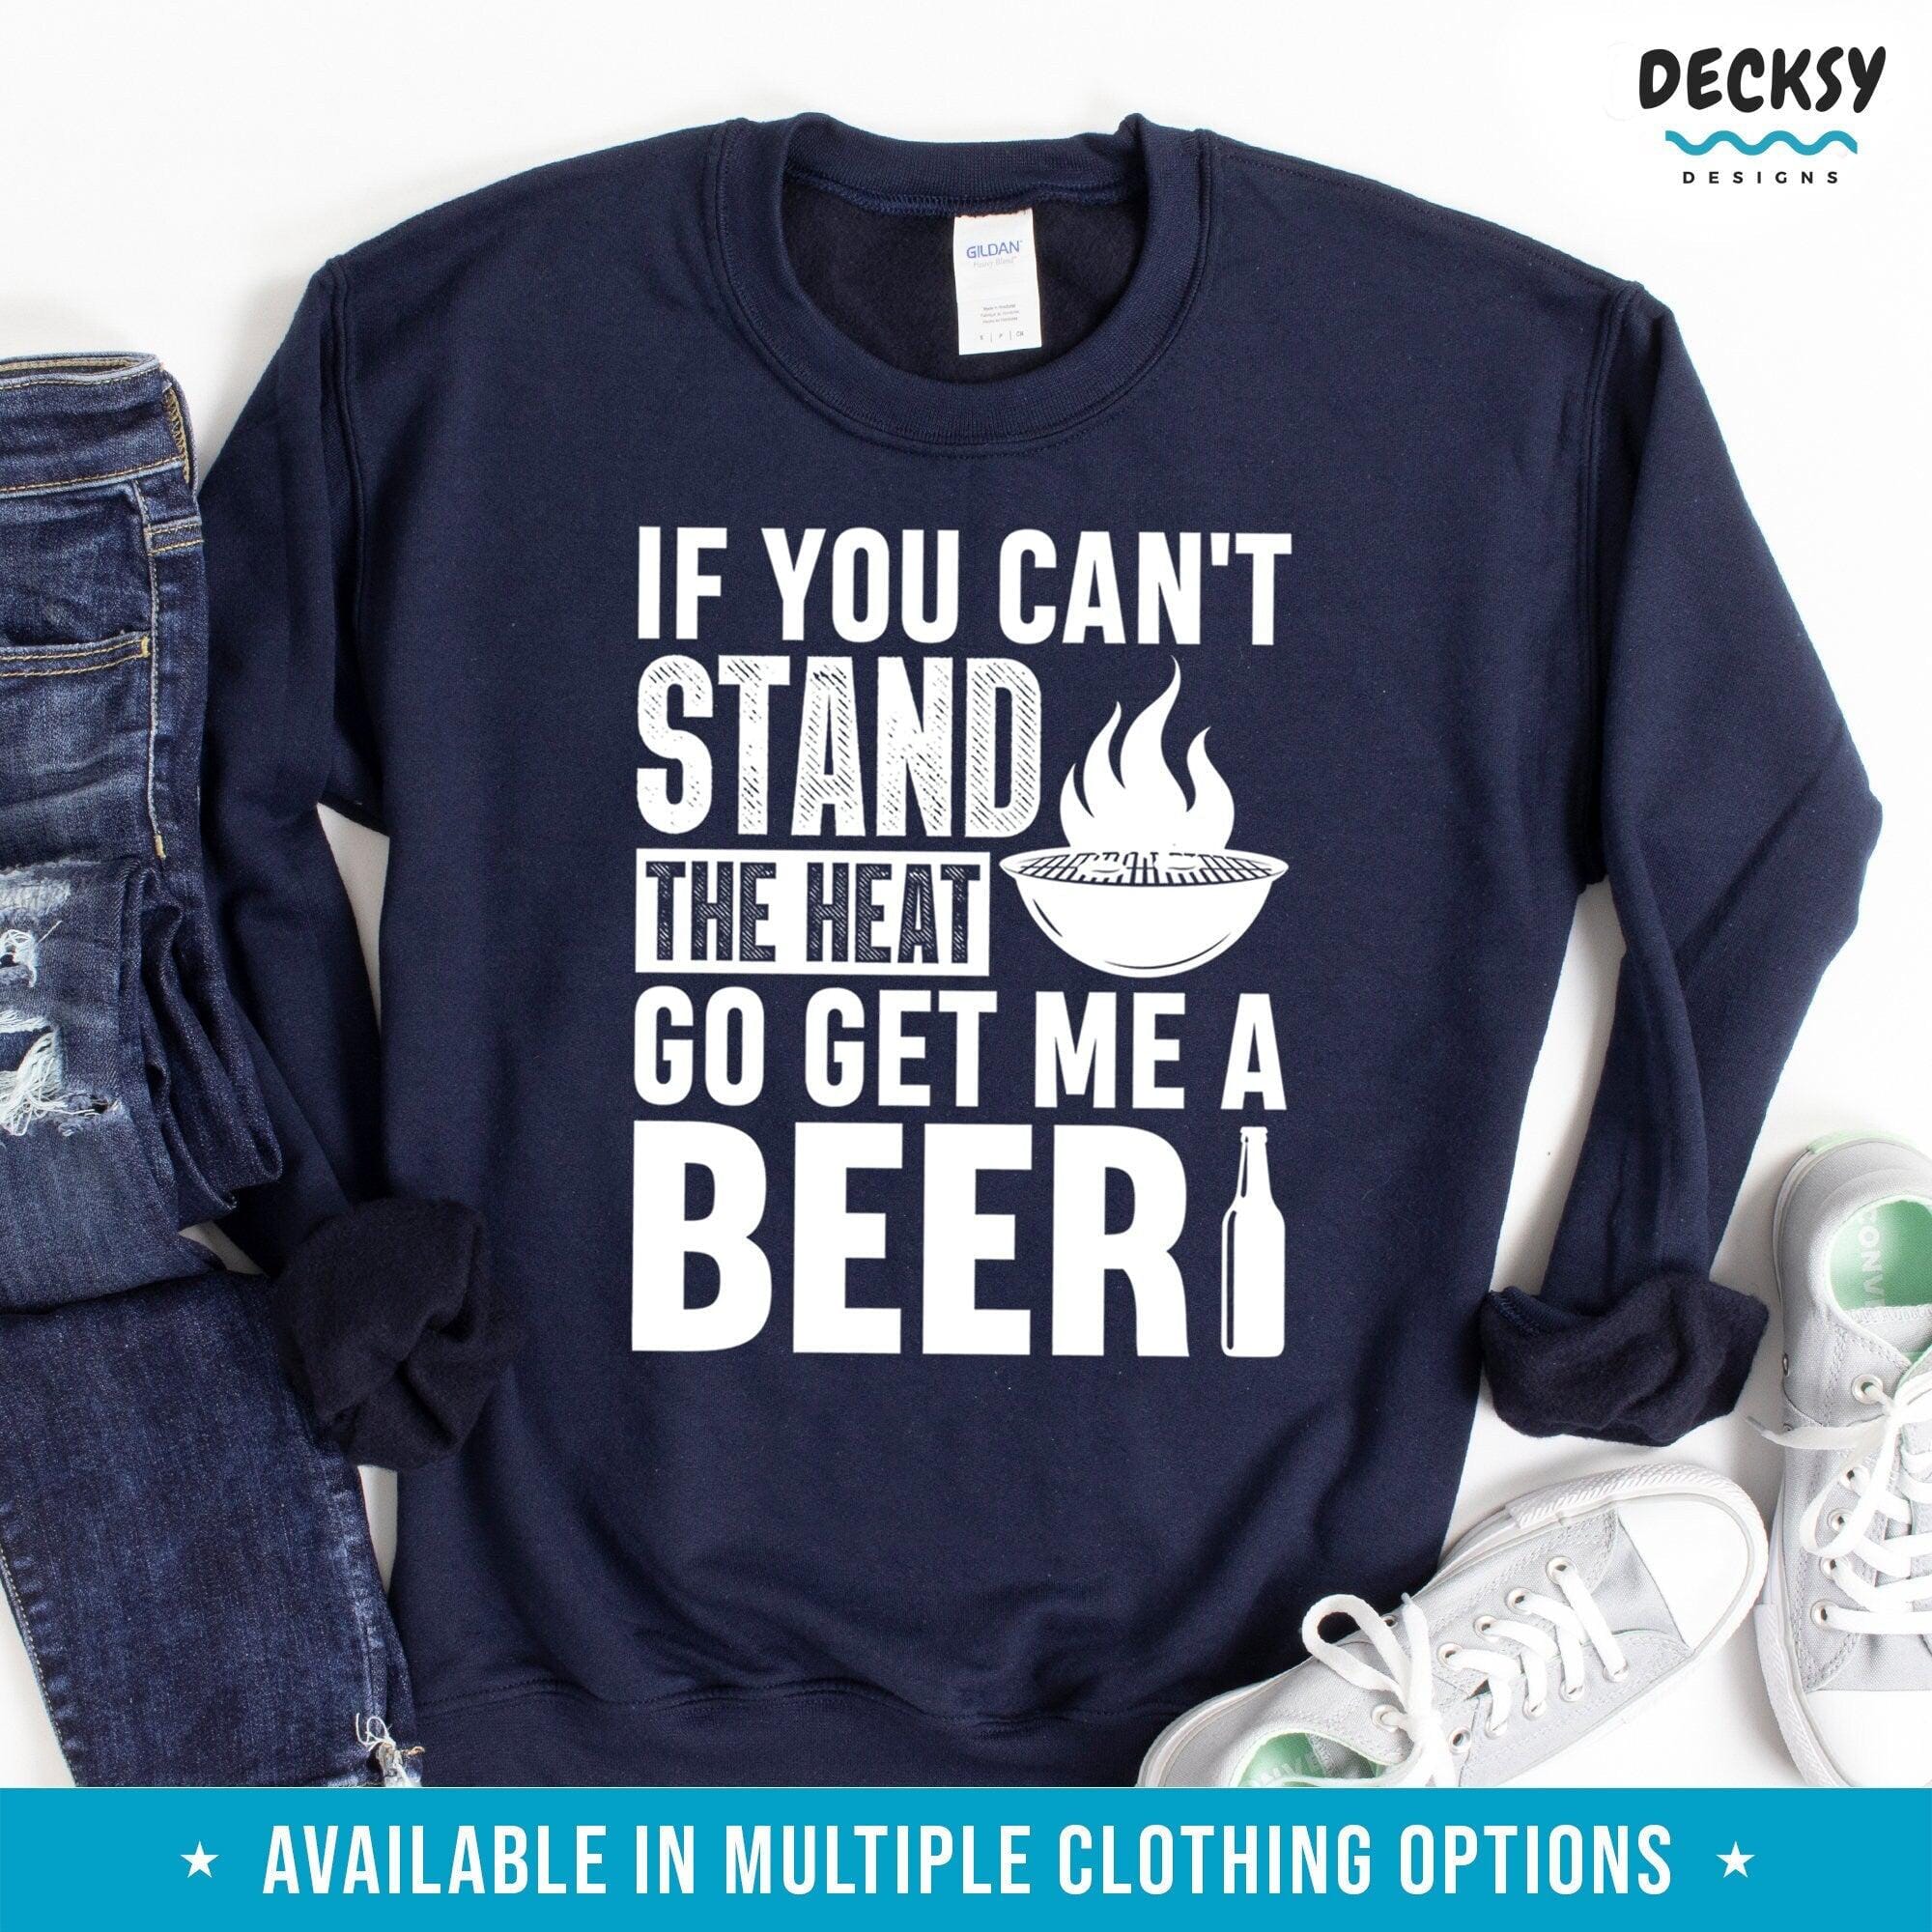 Bbq Beer Shirt, Outdoor Barbecue Gift-Clothing:Gender-Neutral Adult Clothing:Tops & Tees:T-shirts:Graphic Tees-DecksyDesigns